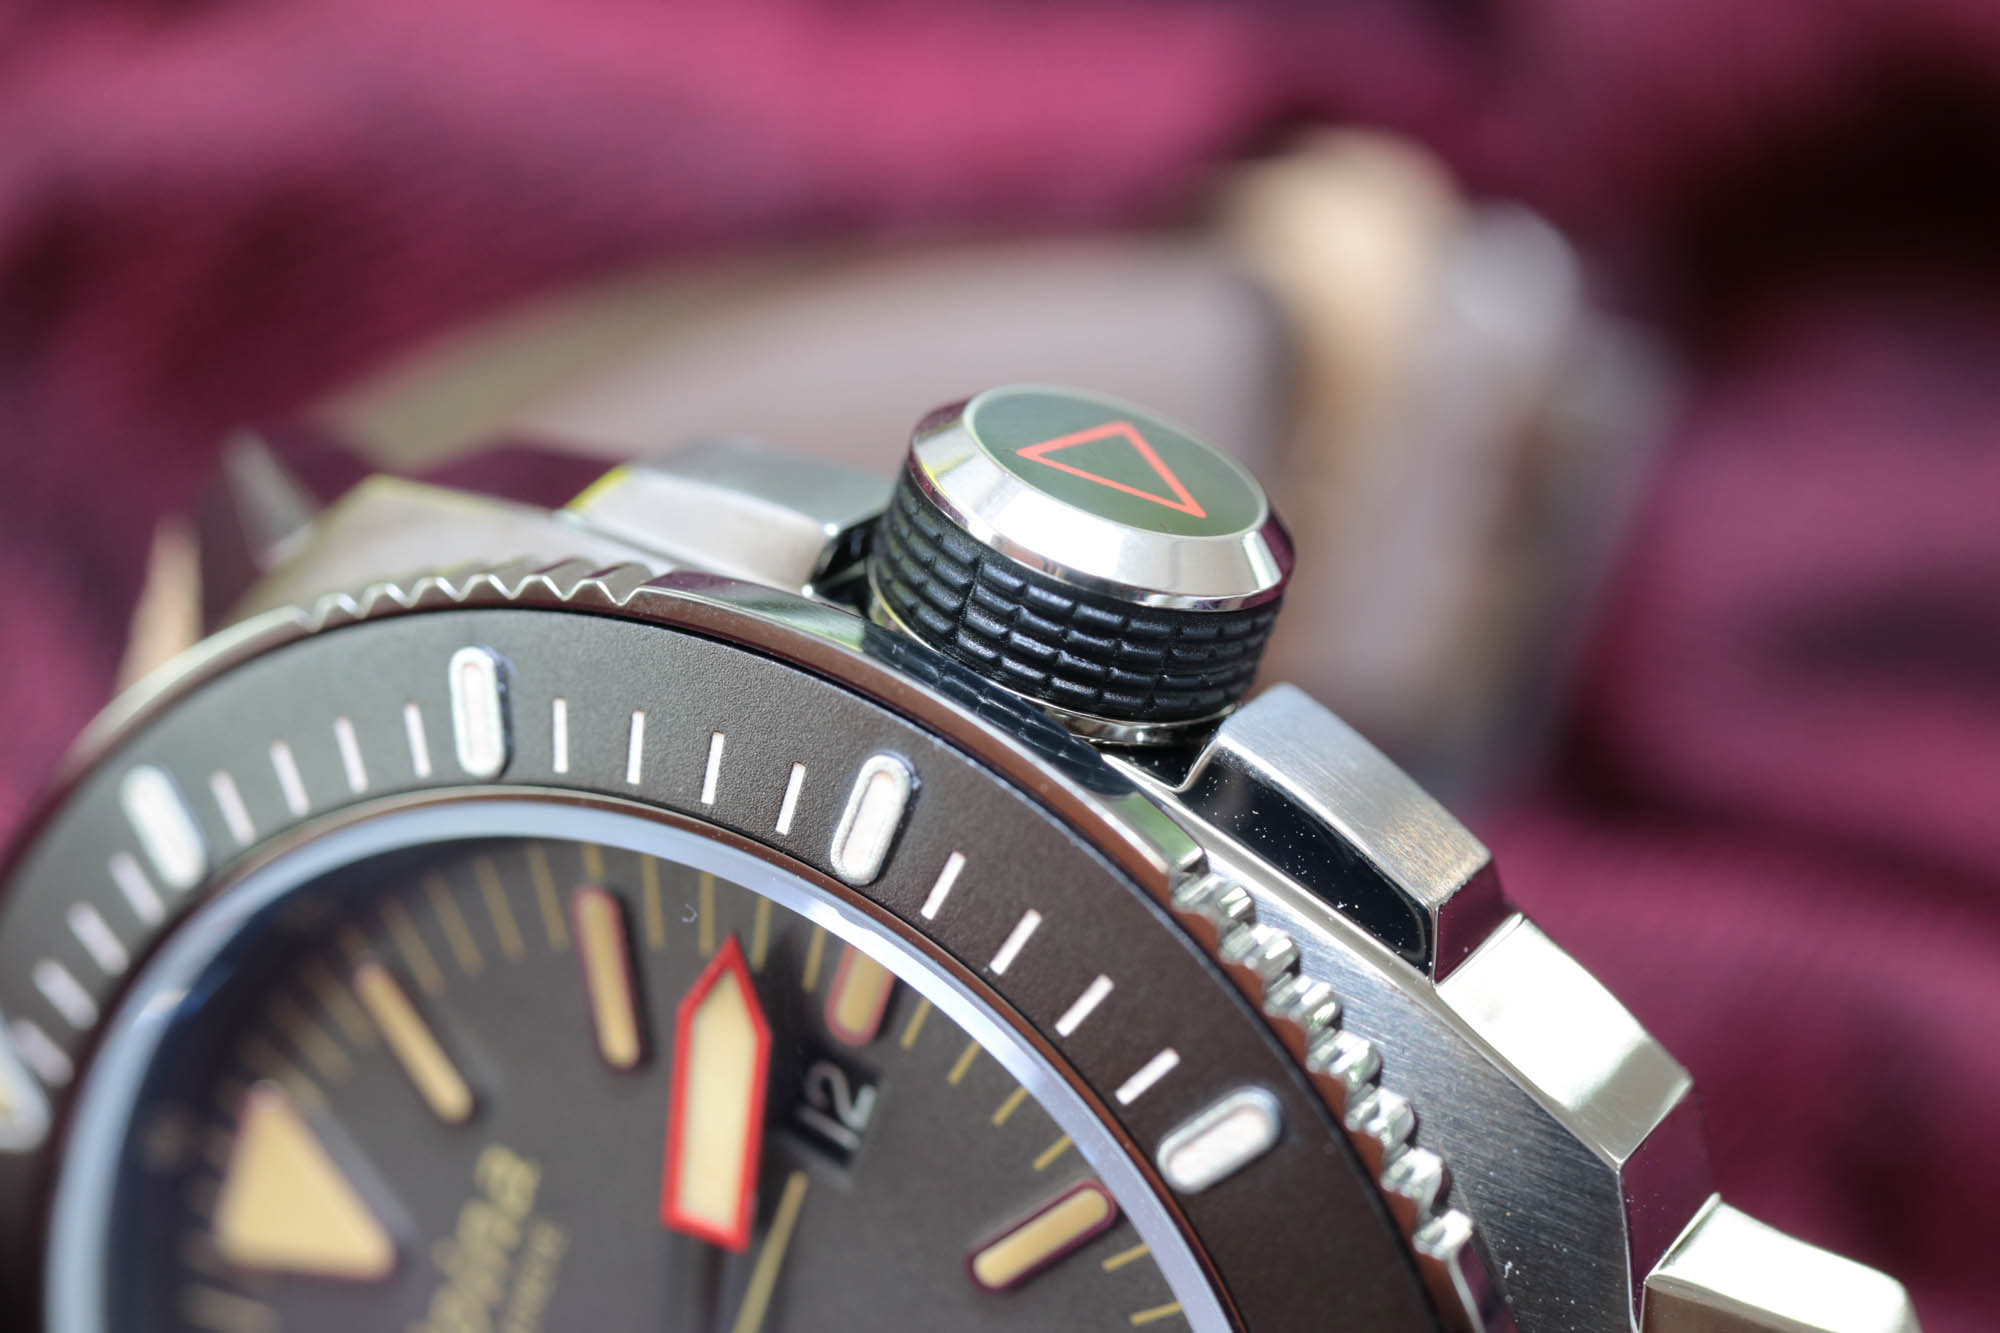 Hands-on with the new Alpina Seastrong Diver 300